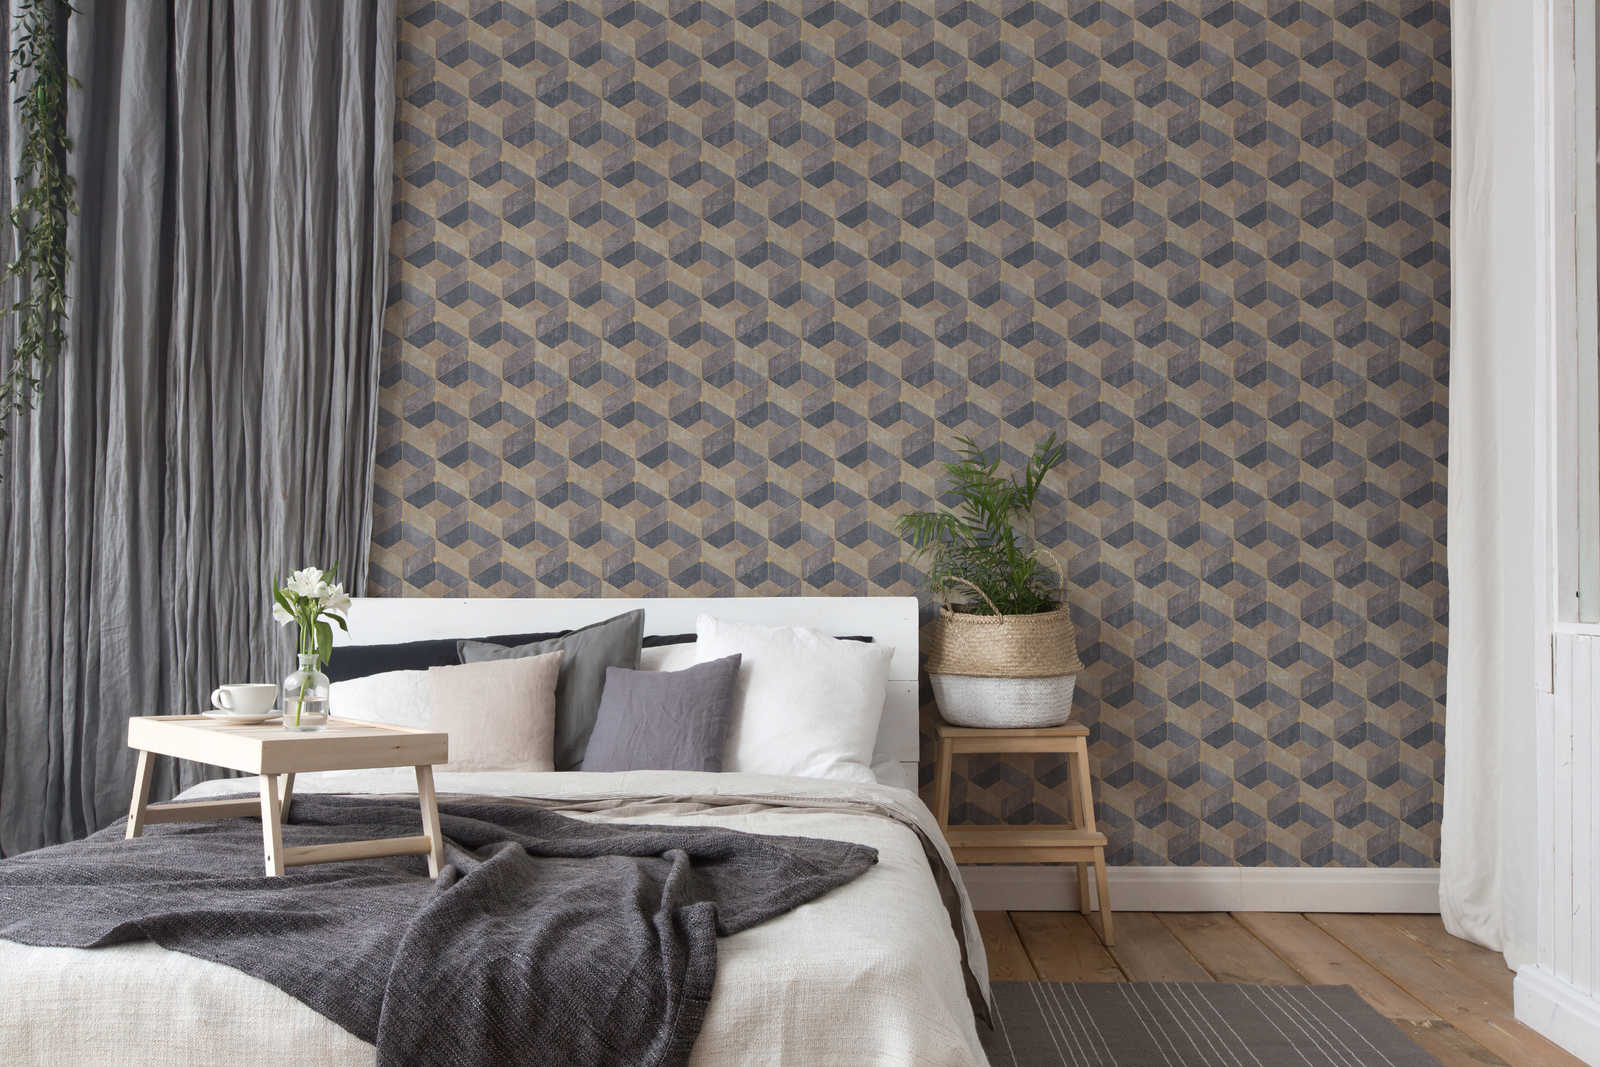             Graphic wallpaper with retro pattern & gold nude - brown, yellow, black
        